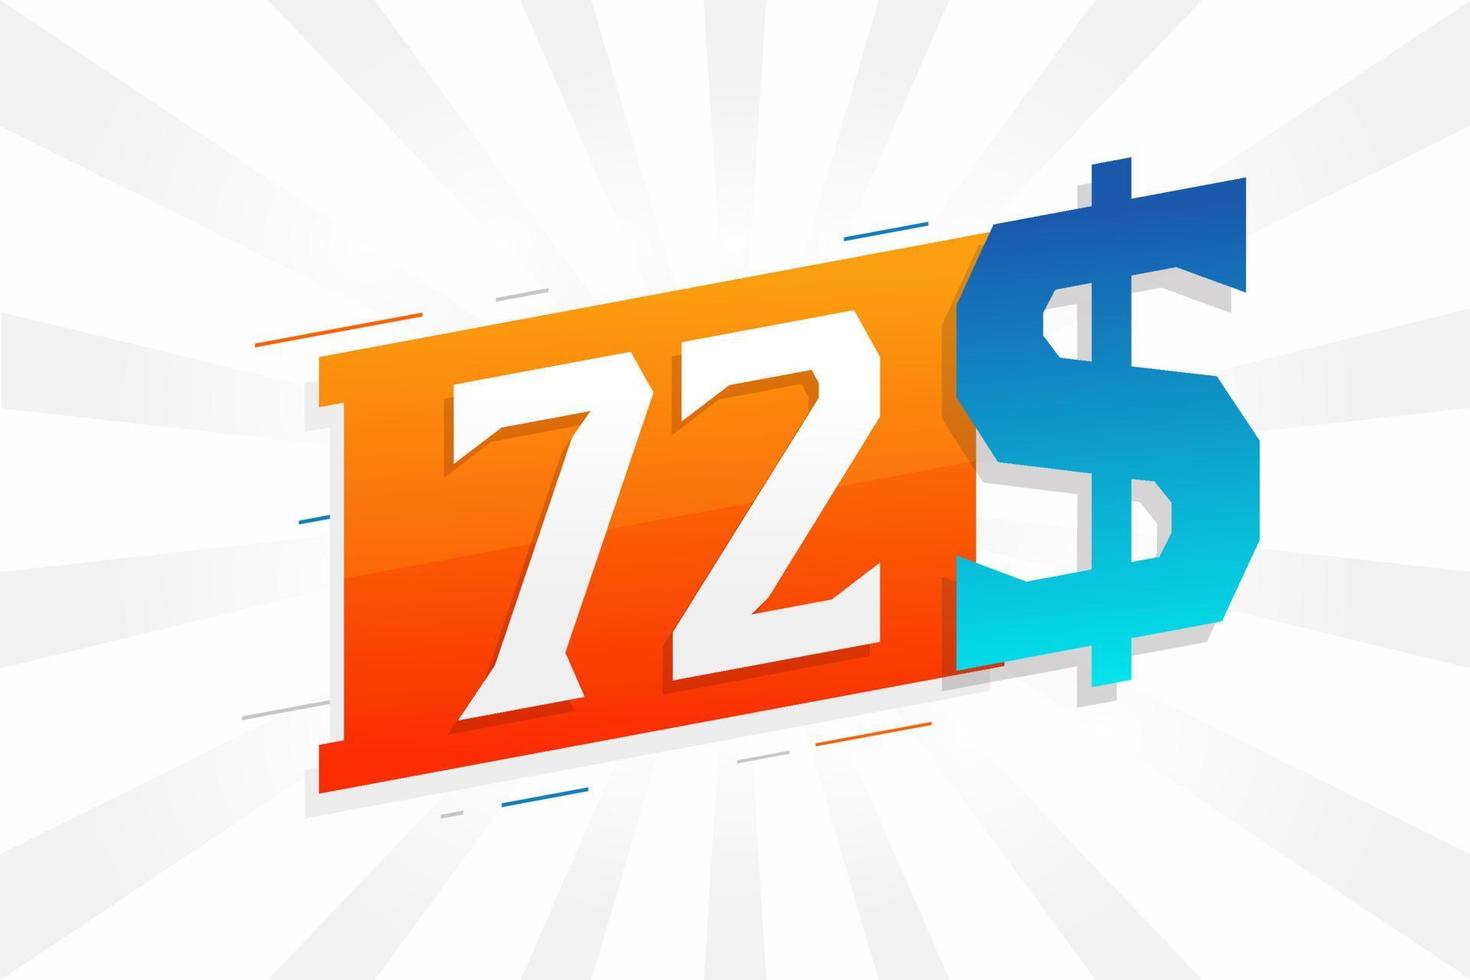 72 Dollar currency vector text symbol. 72 USD United States Dollar American Money stock vector